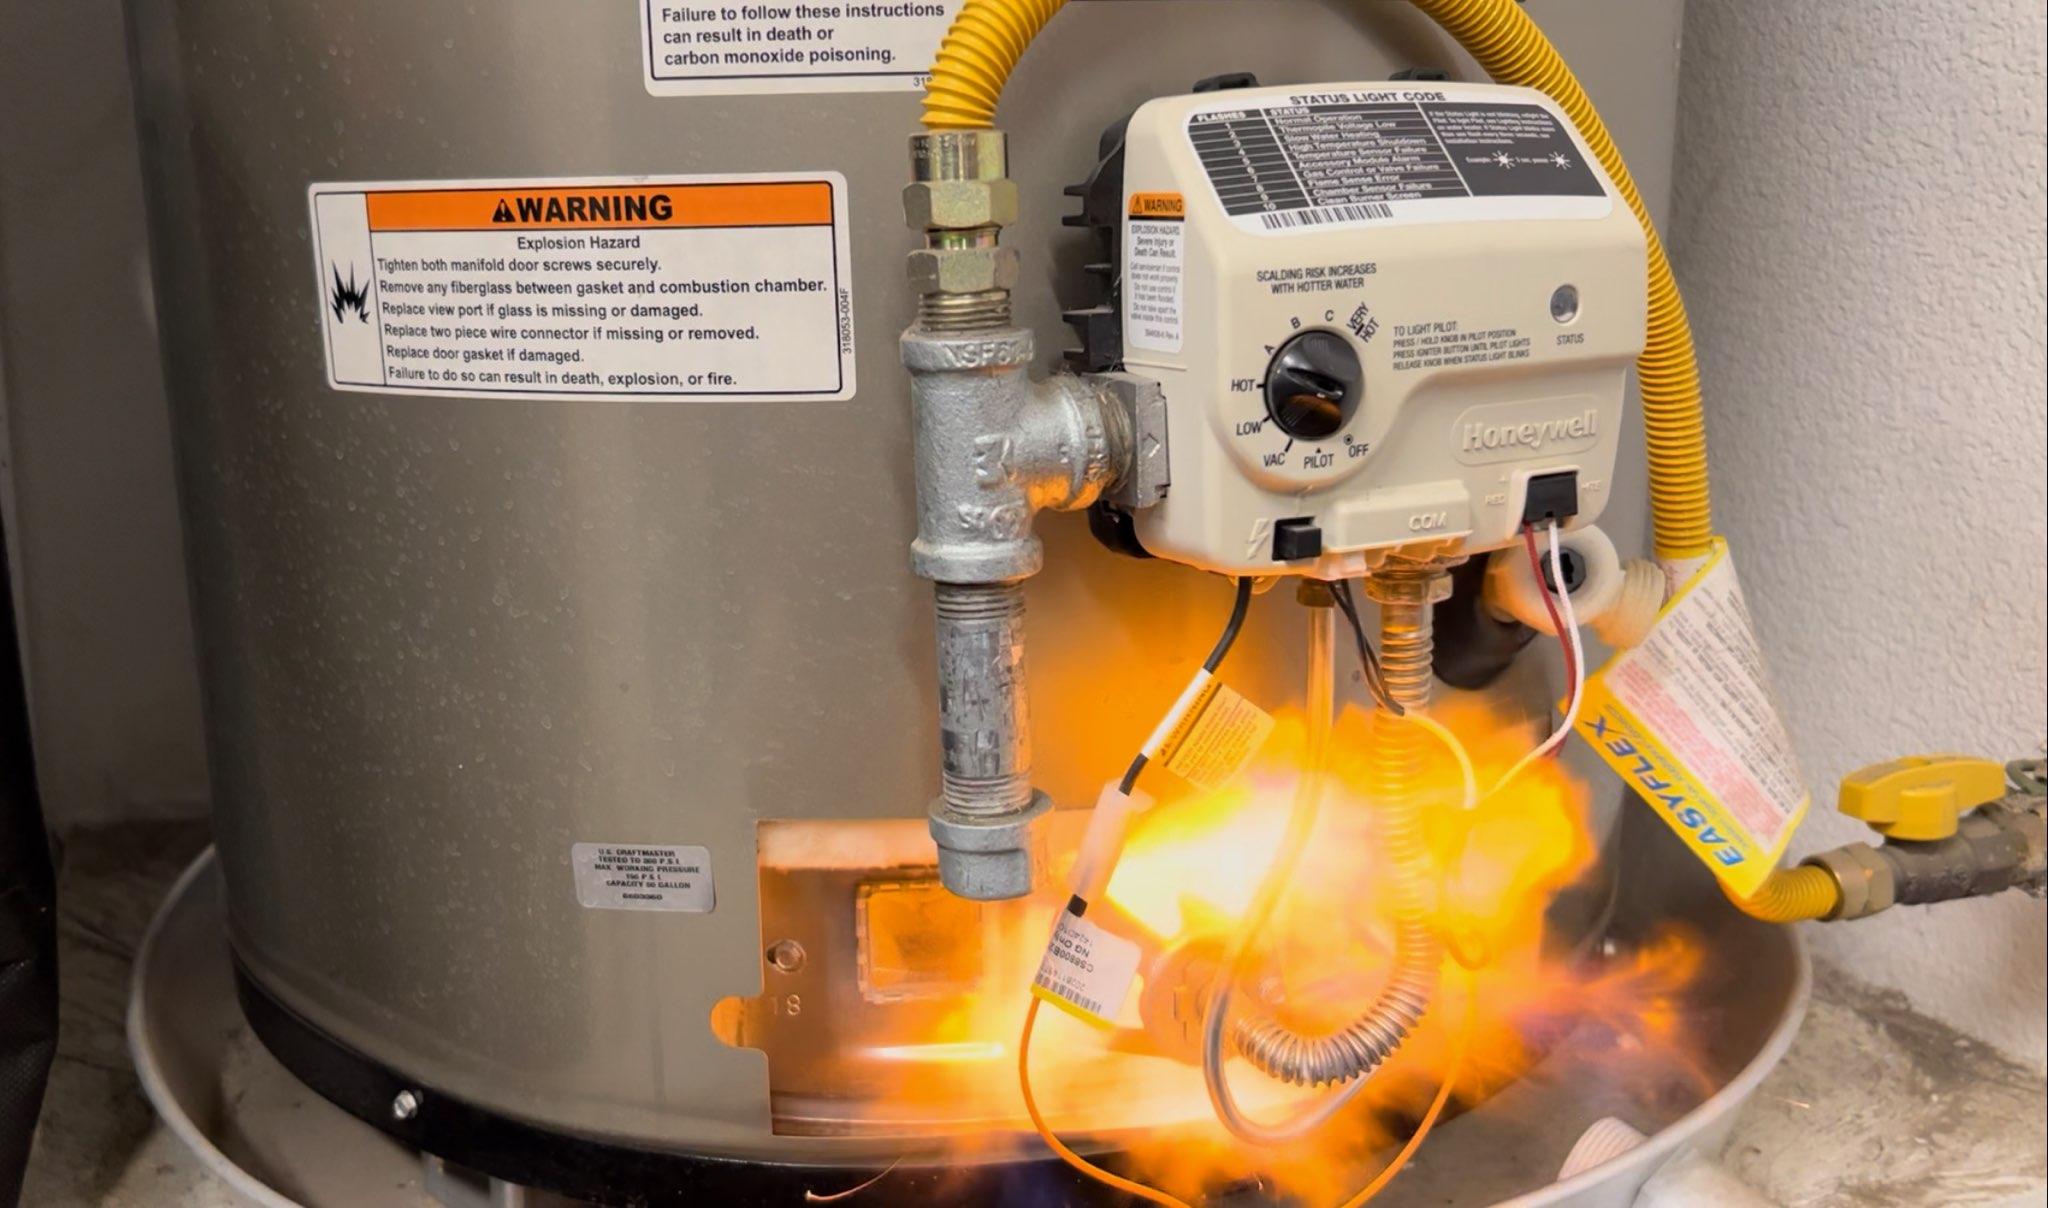 common water heater hazards to watch for